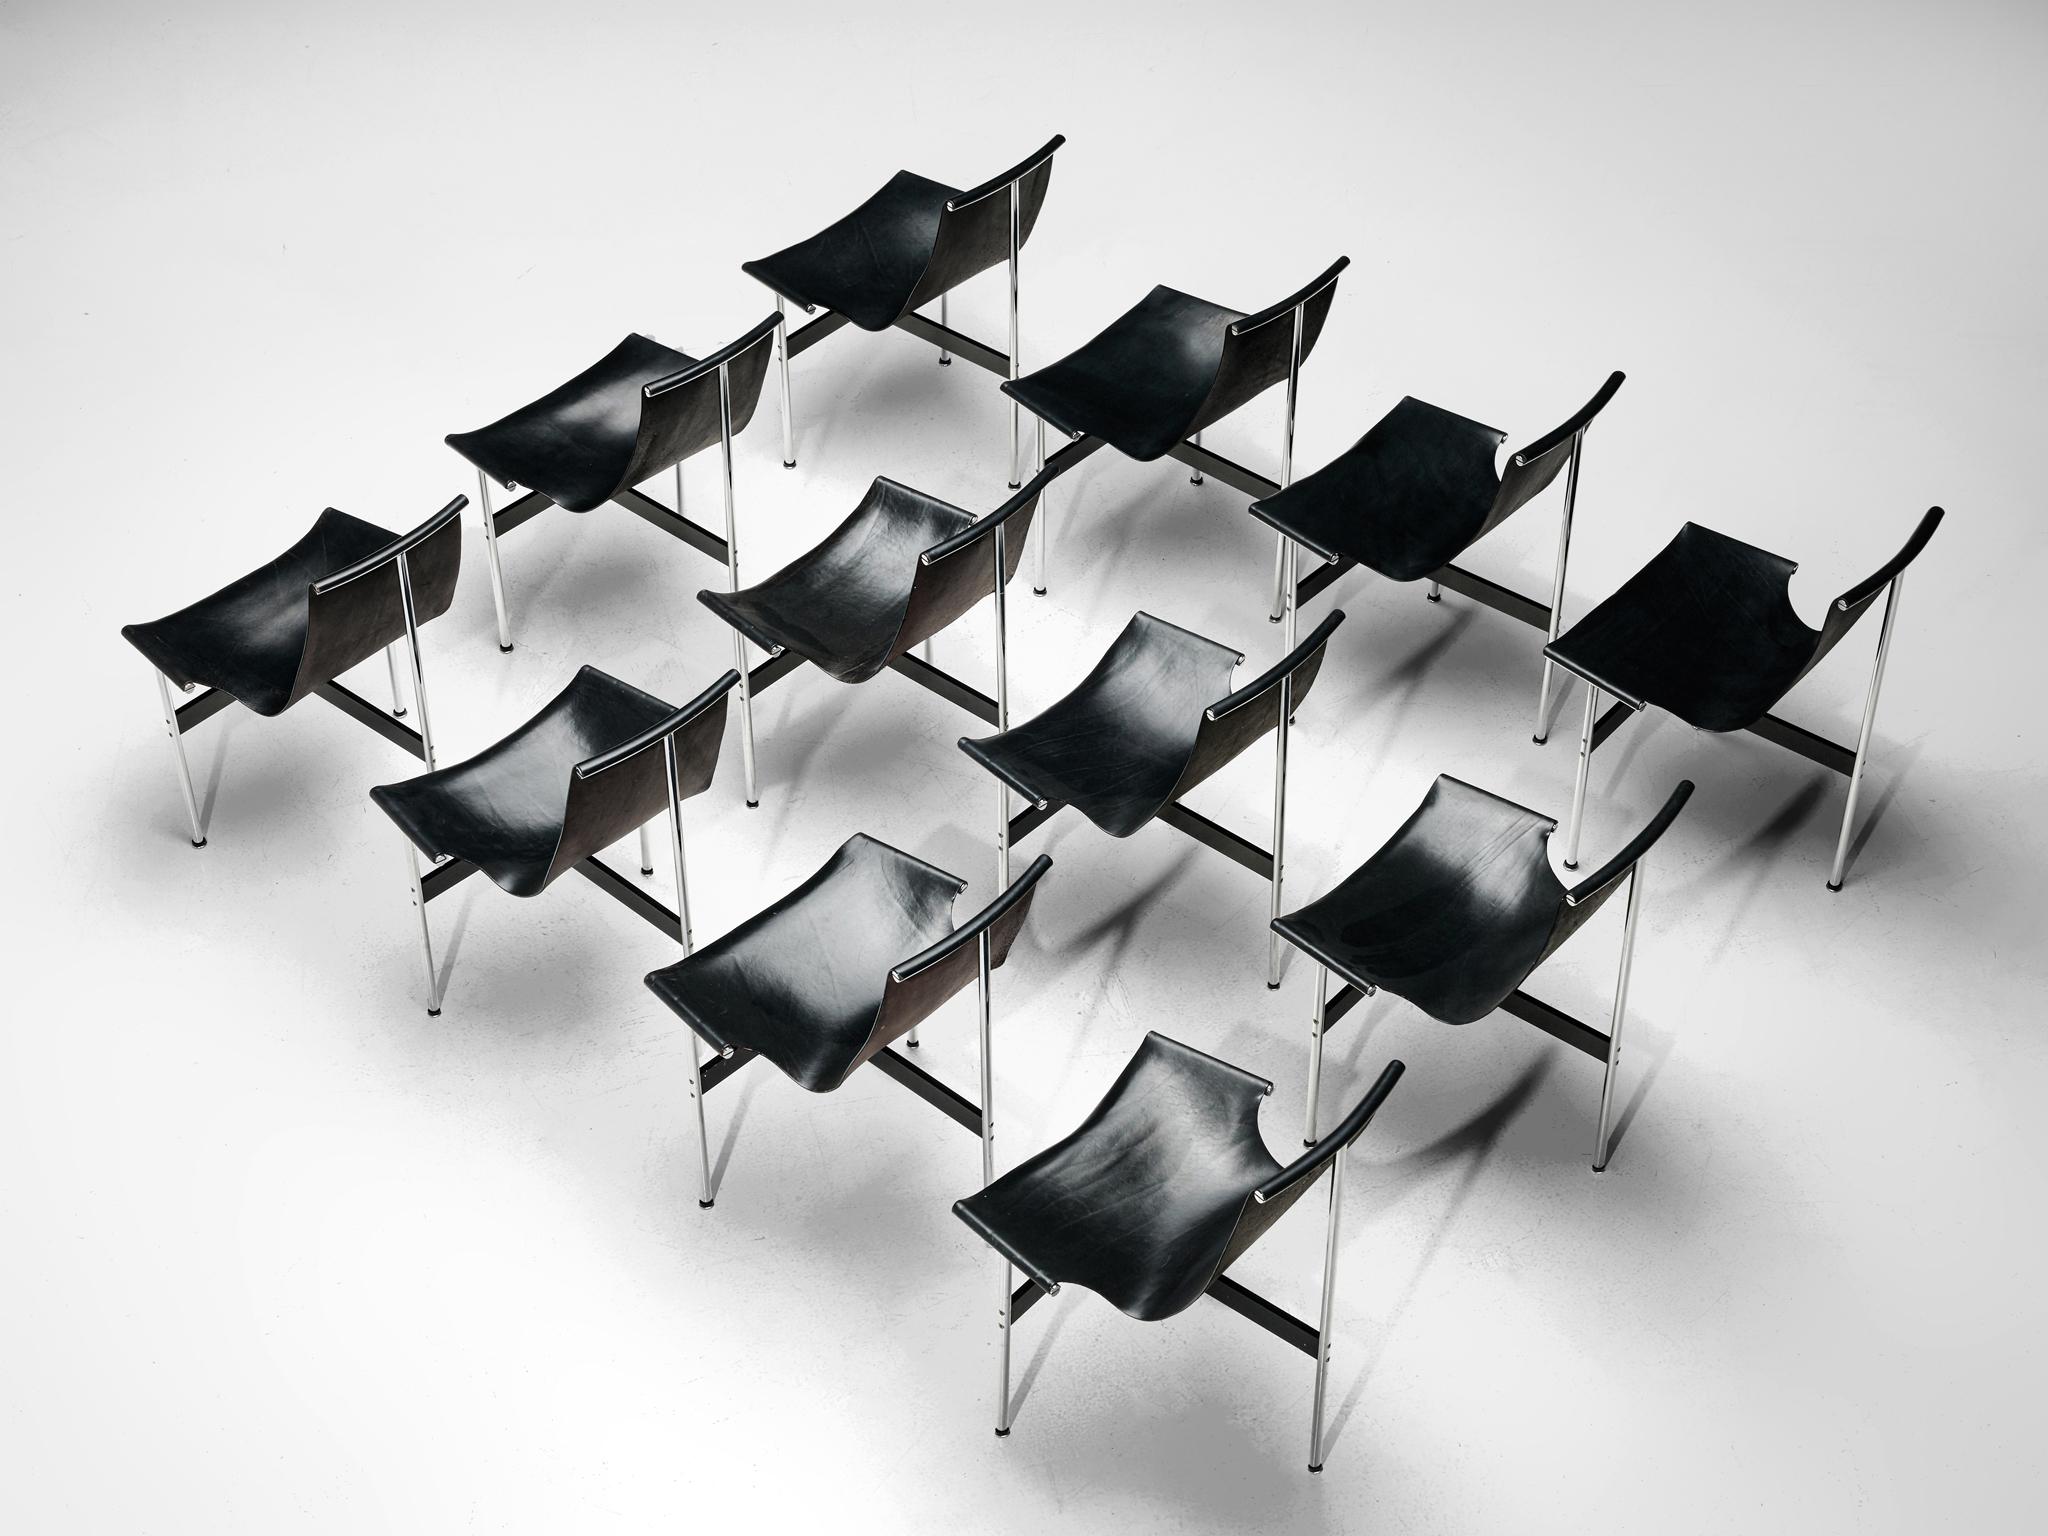 Katavolos, Kelley and Littell, set of 12 T-chairs, chrome-plated steel, enameled steel and leather, United States, 1952.

This set designed by Katavolos, Kelley and Littell of elegant and playful three-legged chairs seems almost too delicate to